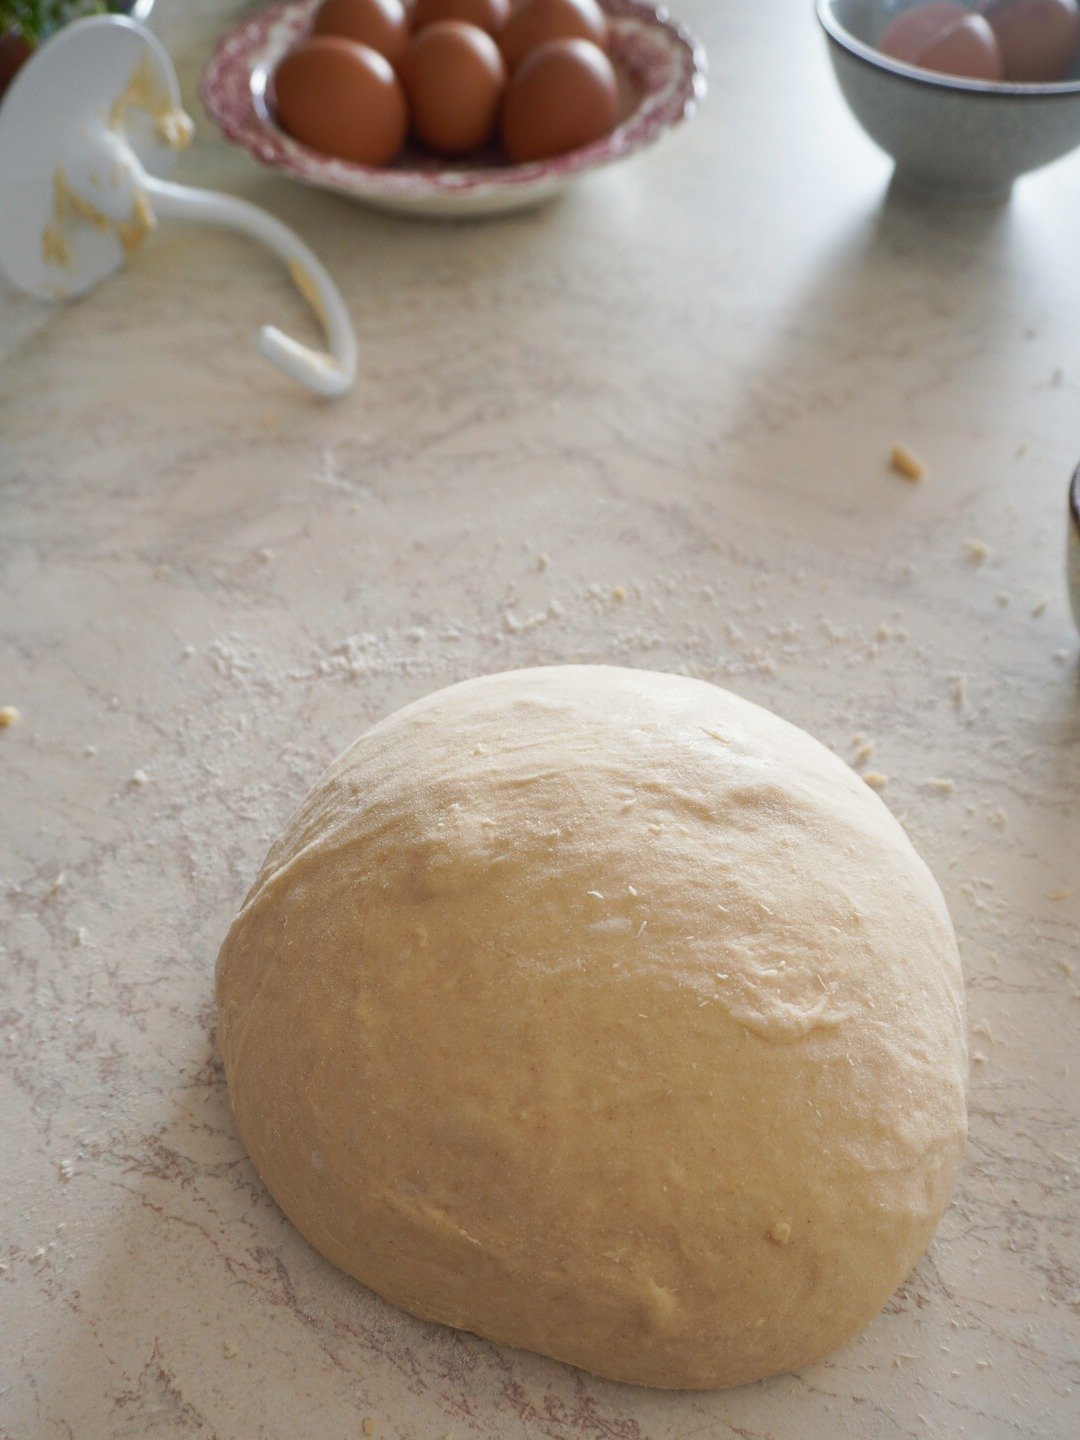 Knead your dough using a stand mixture until it comes together. Add the last 1 1/2 cup of flour 5 minutes into kneading.  Have your machine on low to begin with, slowly increasing the speed for about 10 - 15 minutes.  Your dough will also need 10 minutes of kneading by hand.  